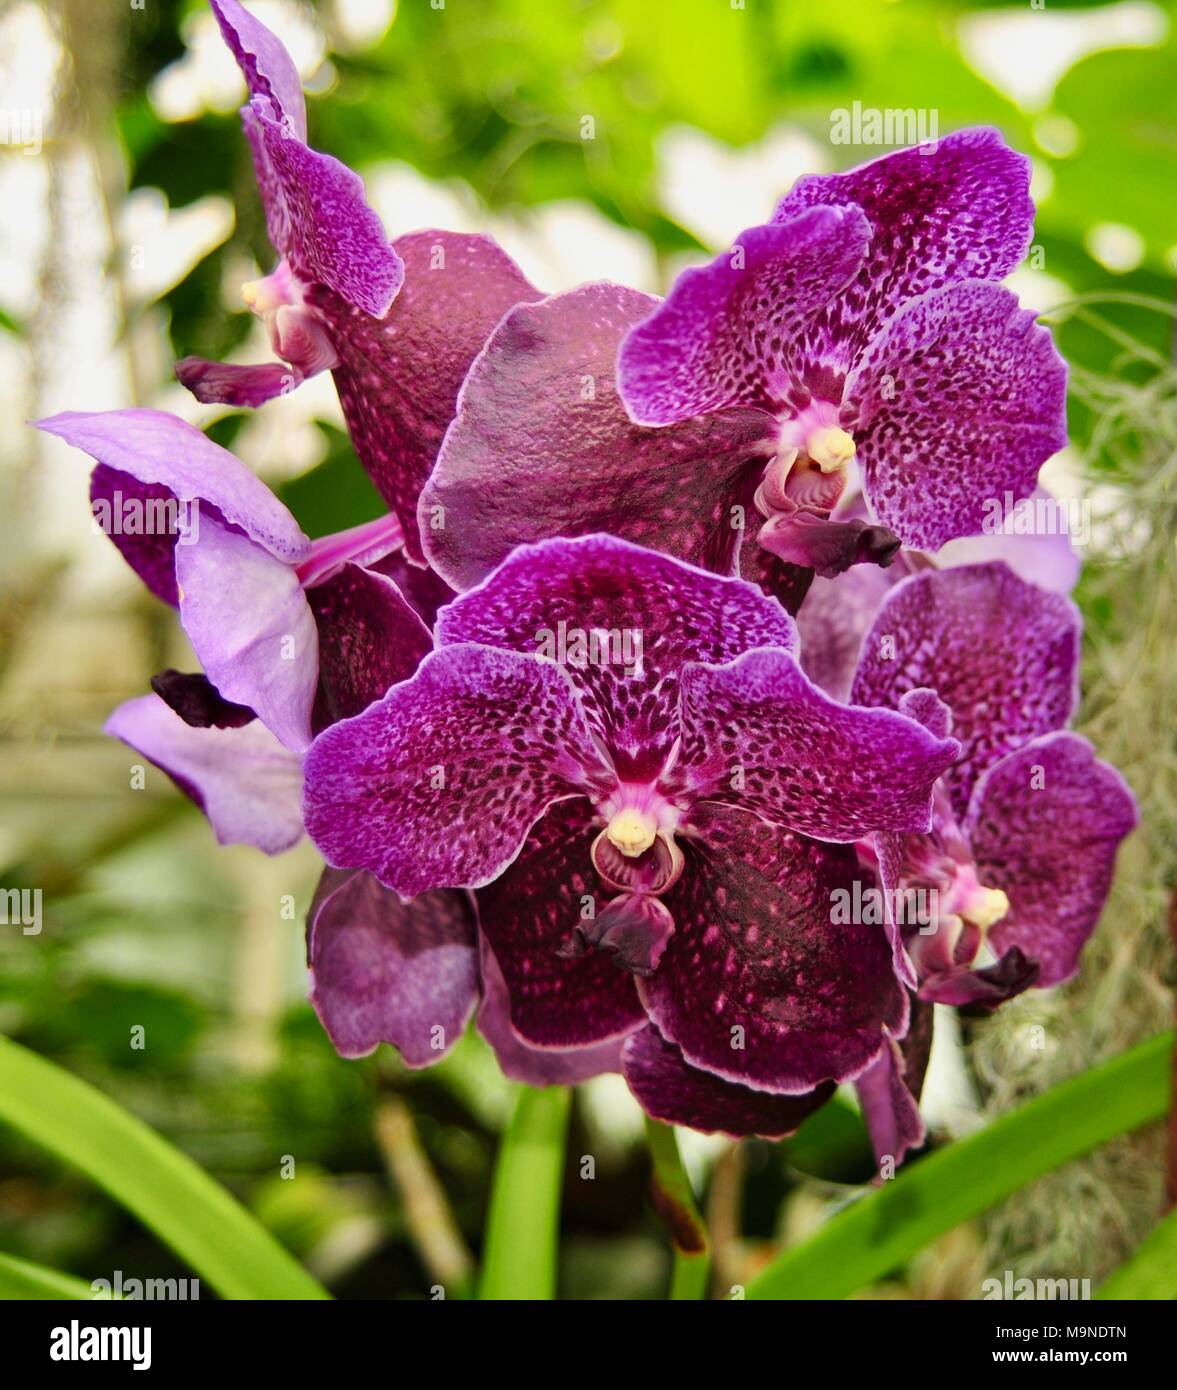 A cluster of purple Vanda orchids in a tropical garden Stock Photo